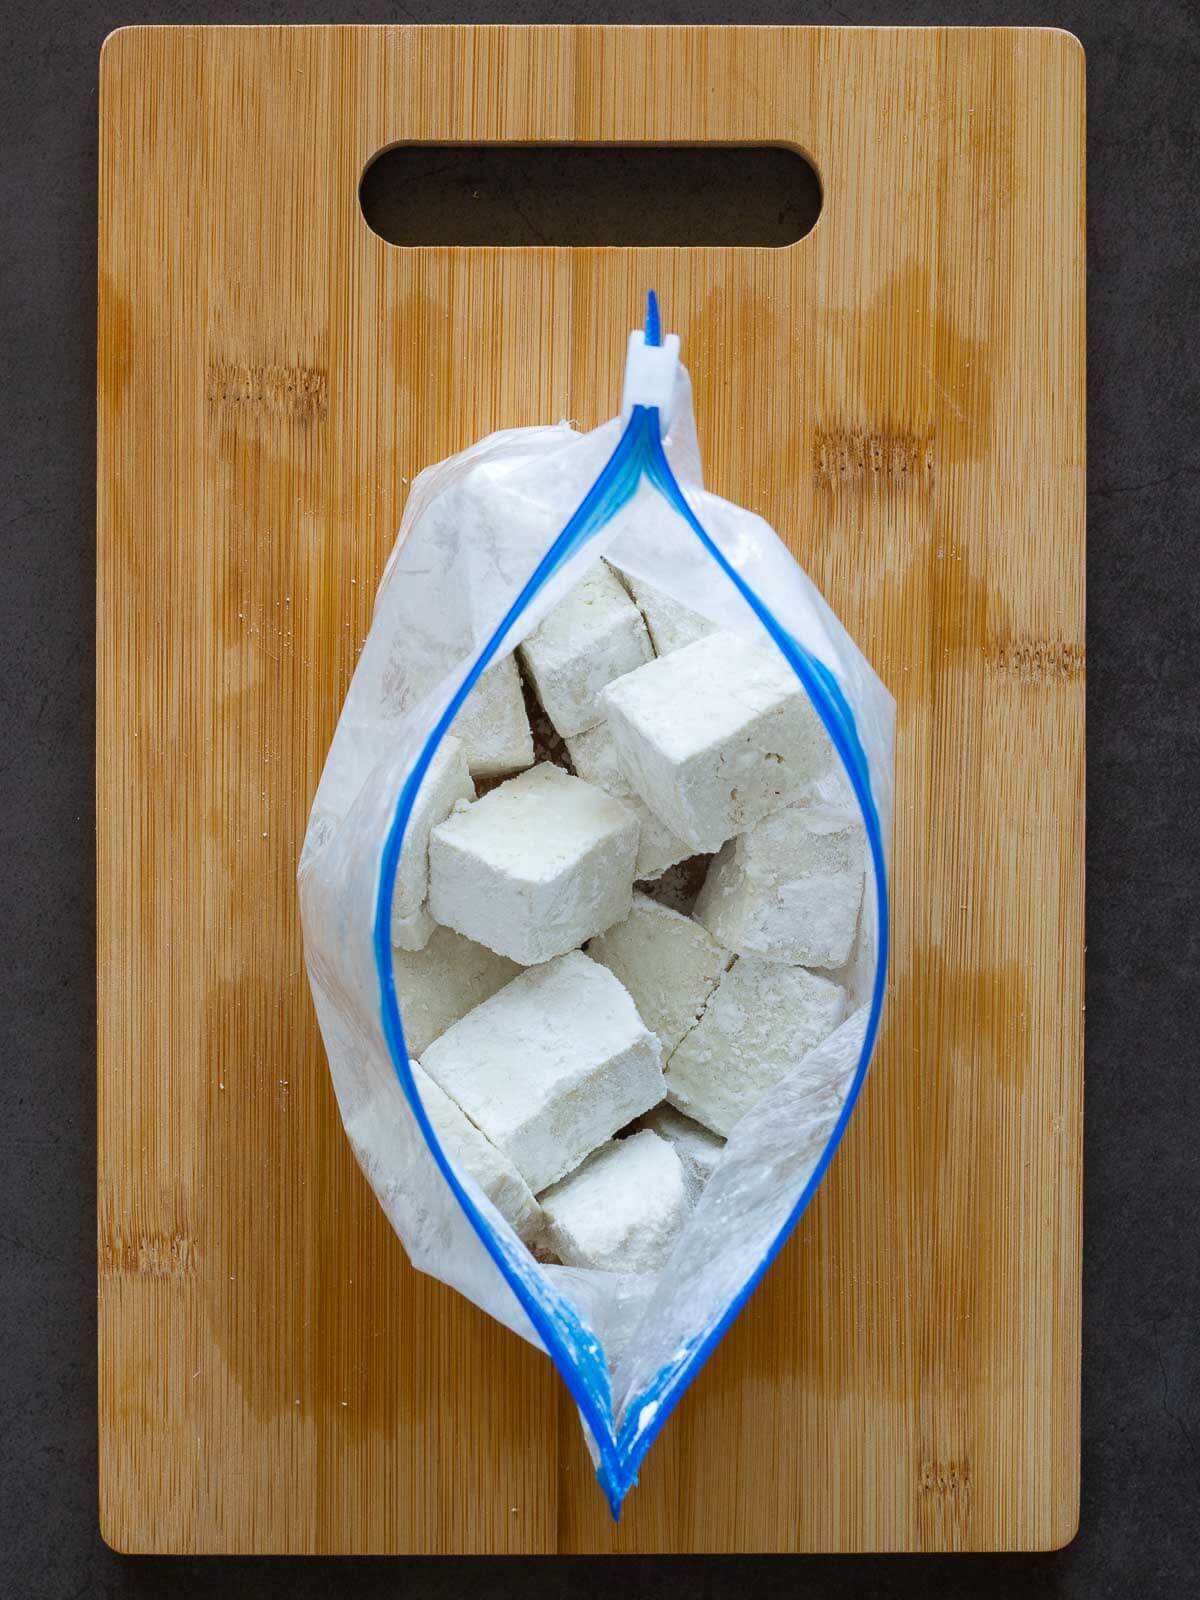 add the tofu dices along to Cornstarch to a Ziplock bag